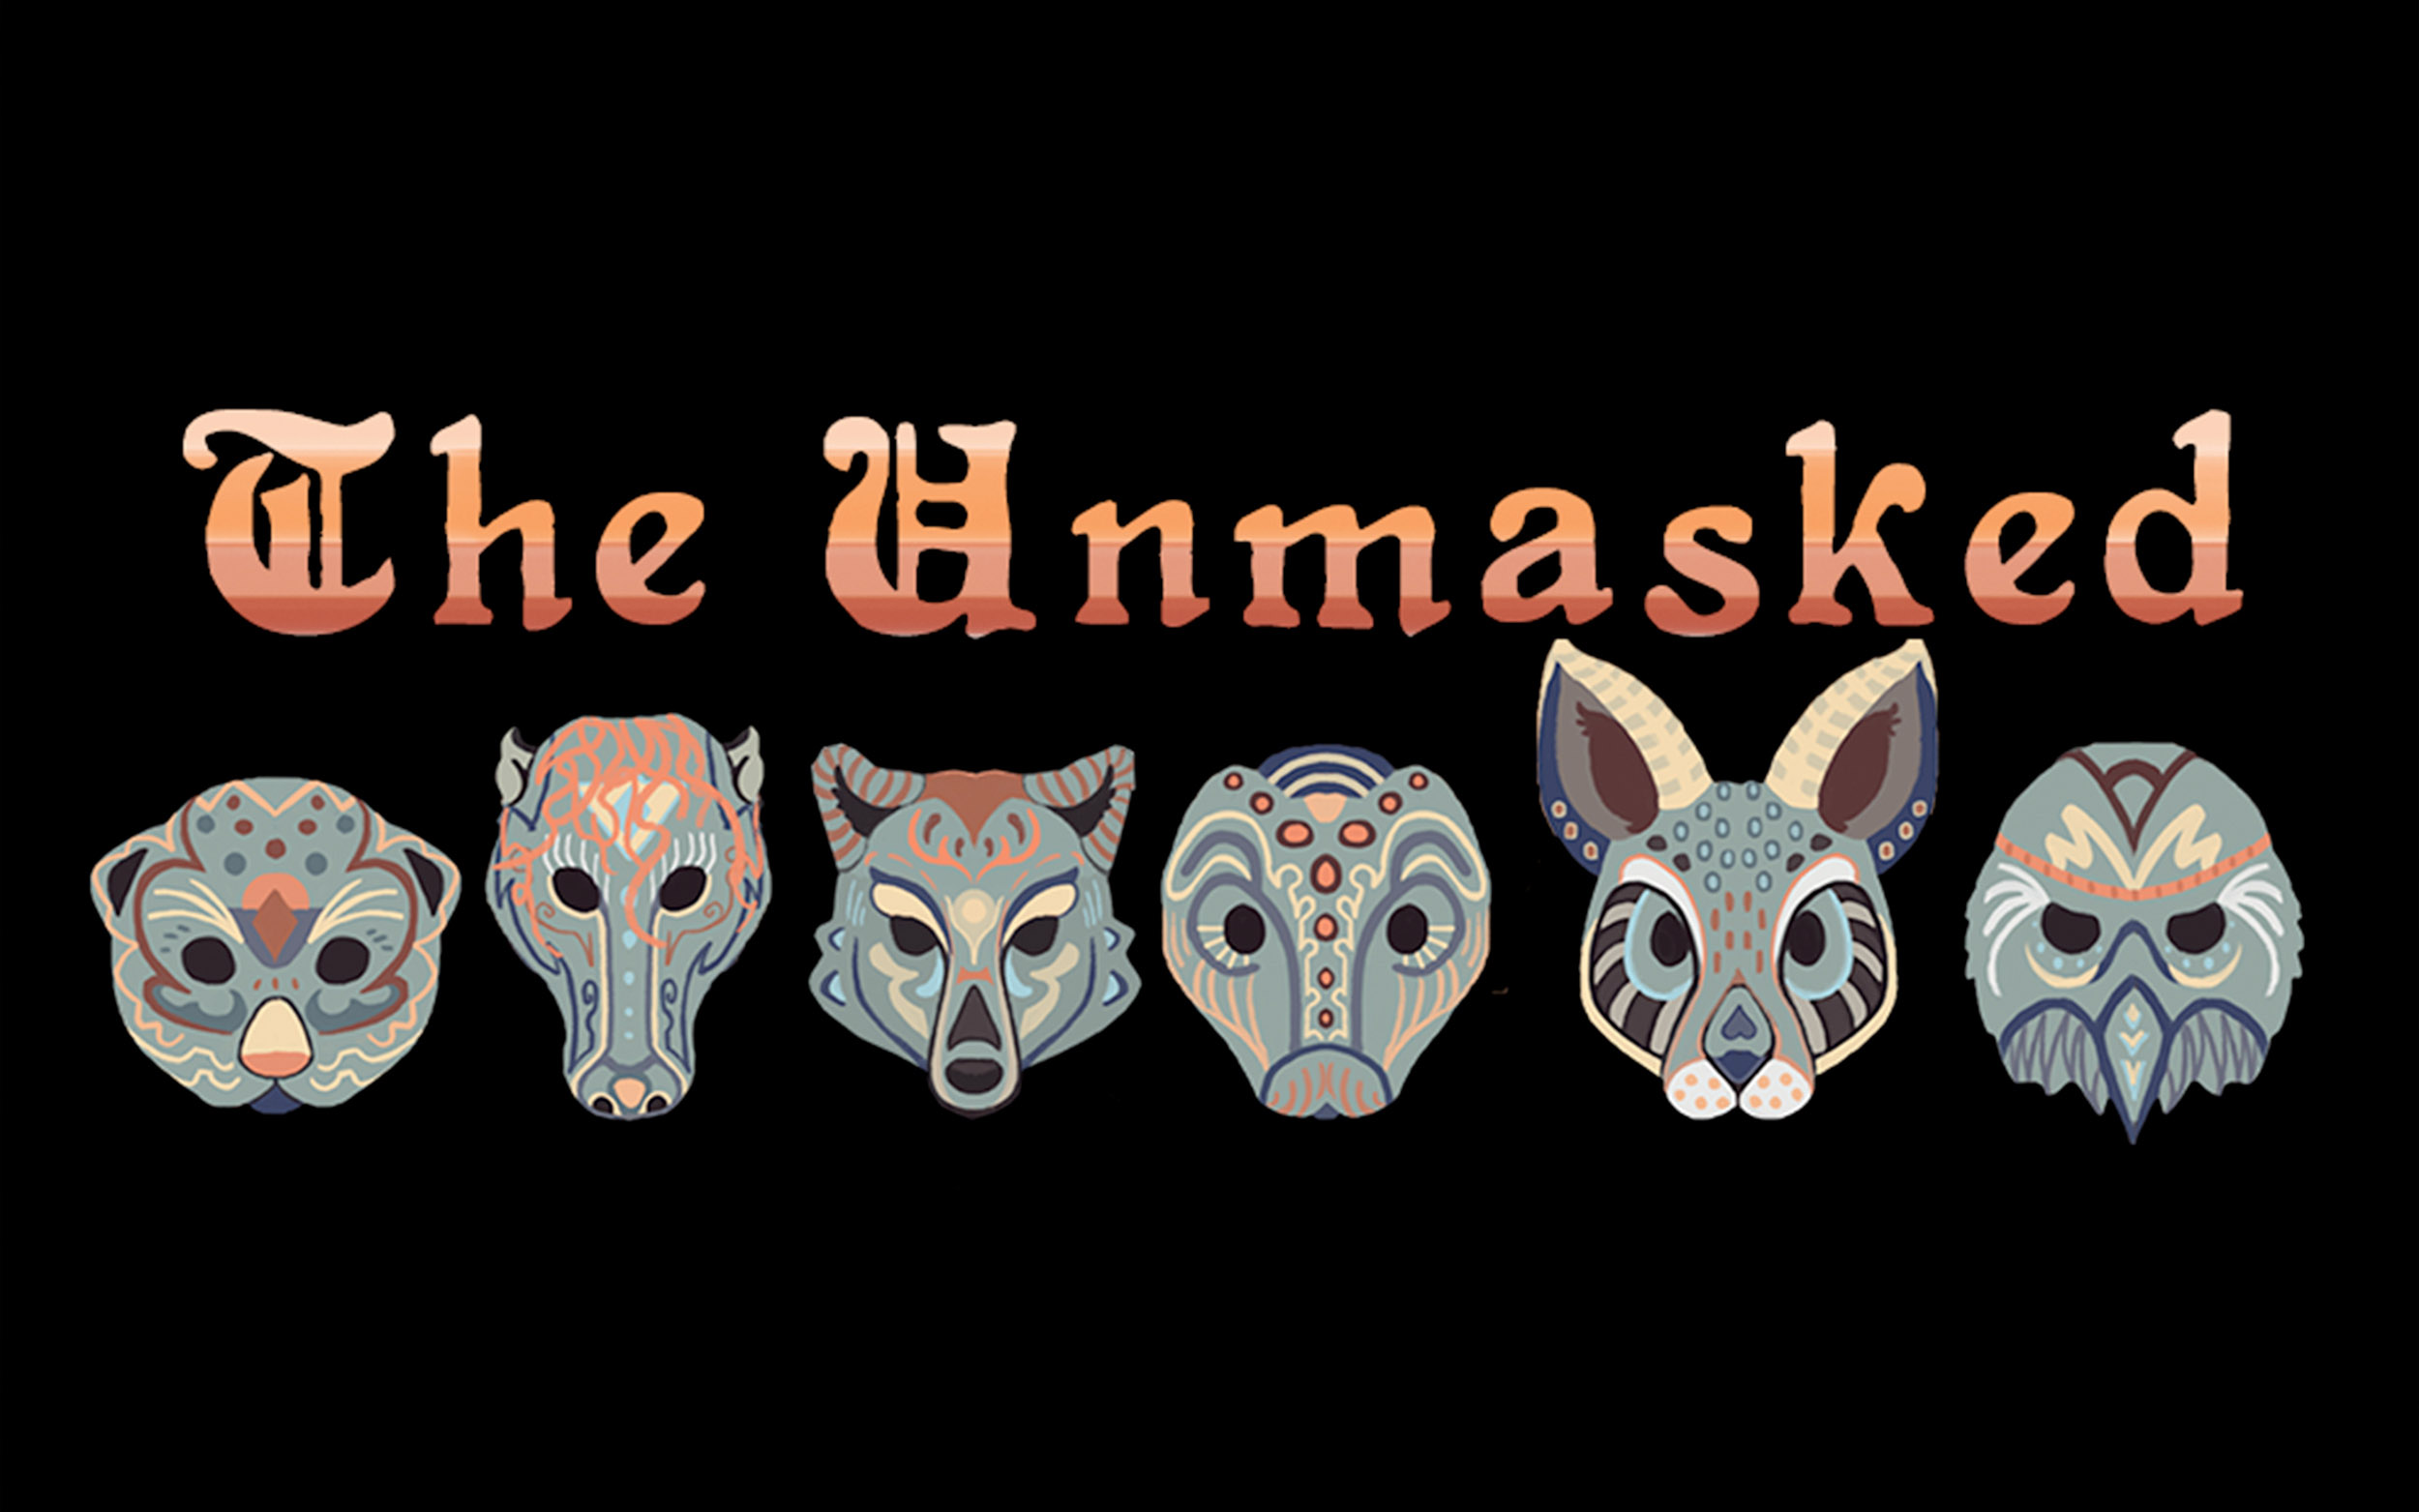 Text reading 'The Unmasked' with six decorated animal masks underneath it. Masks from left to right are of an otter, horse, wolf, snake, rabbit, and raven